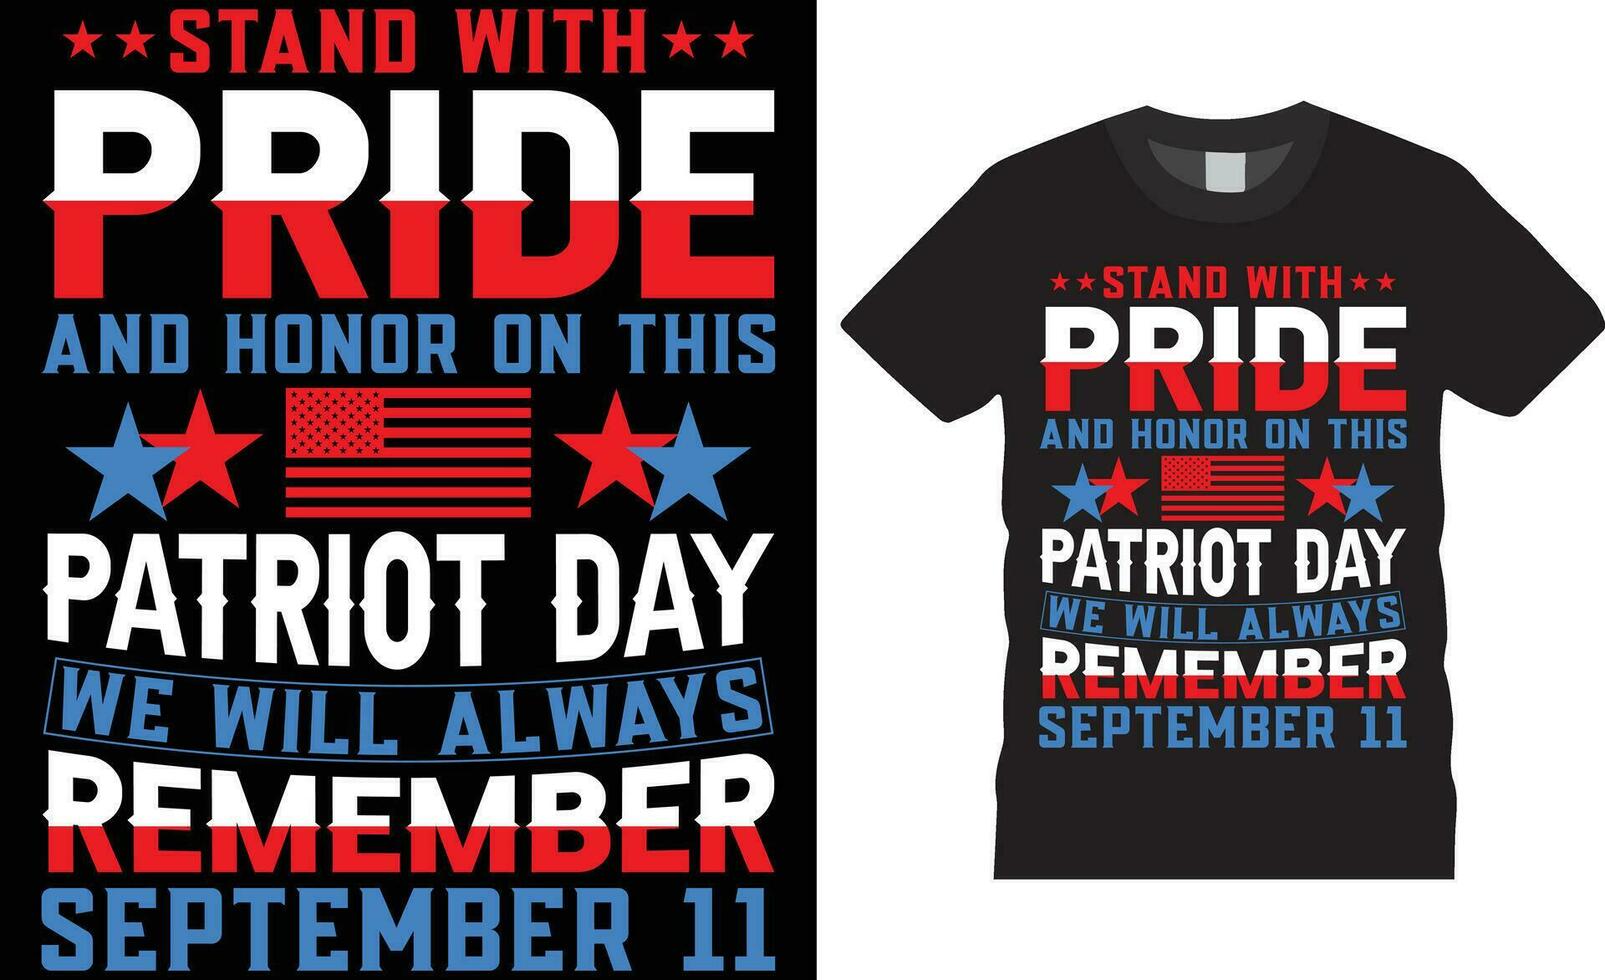 September 9.11 Patriot Day T-shirt Design vector with print template.Stand with pride and honor on this patriot day we will always remember september 11